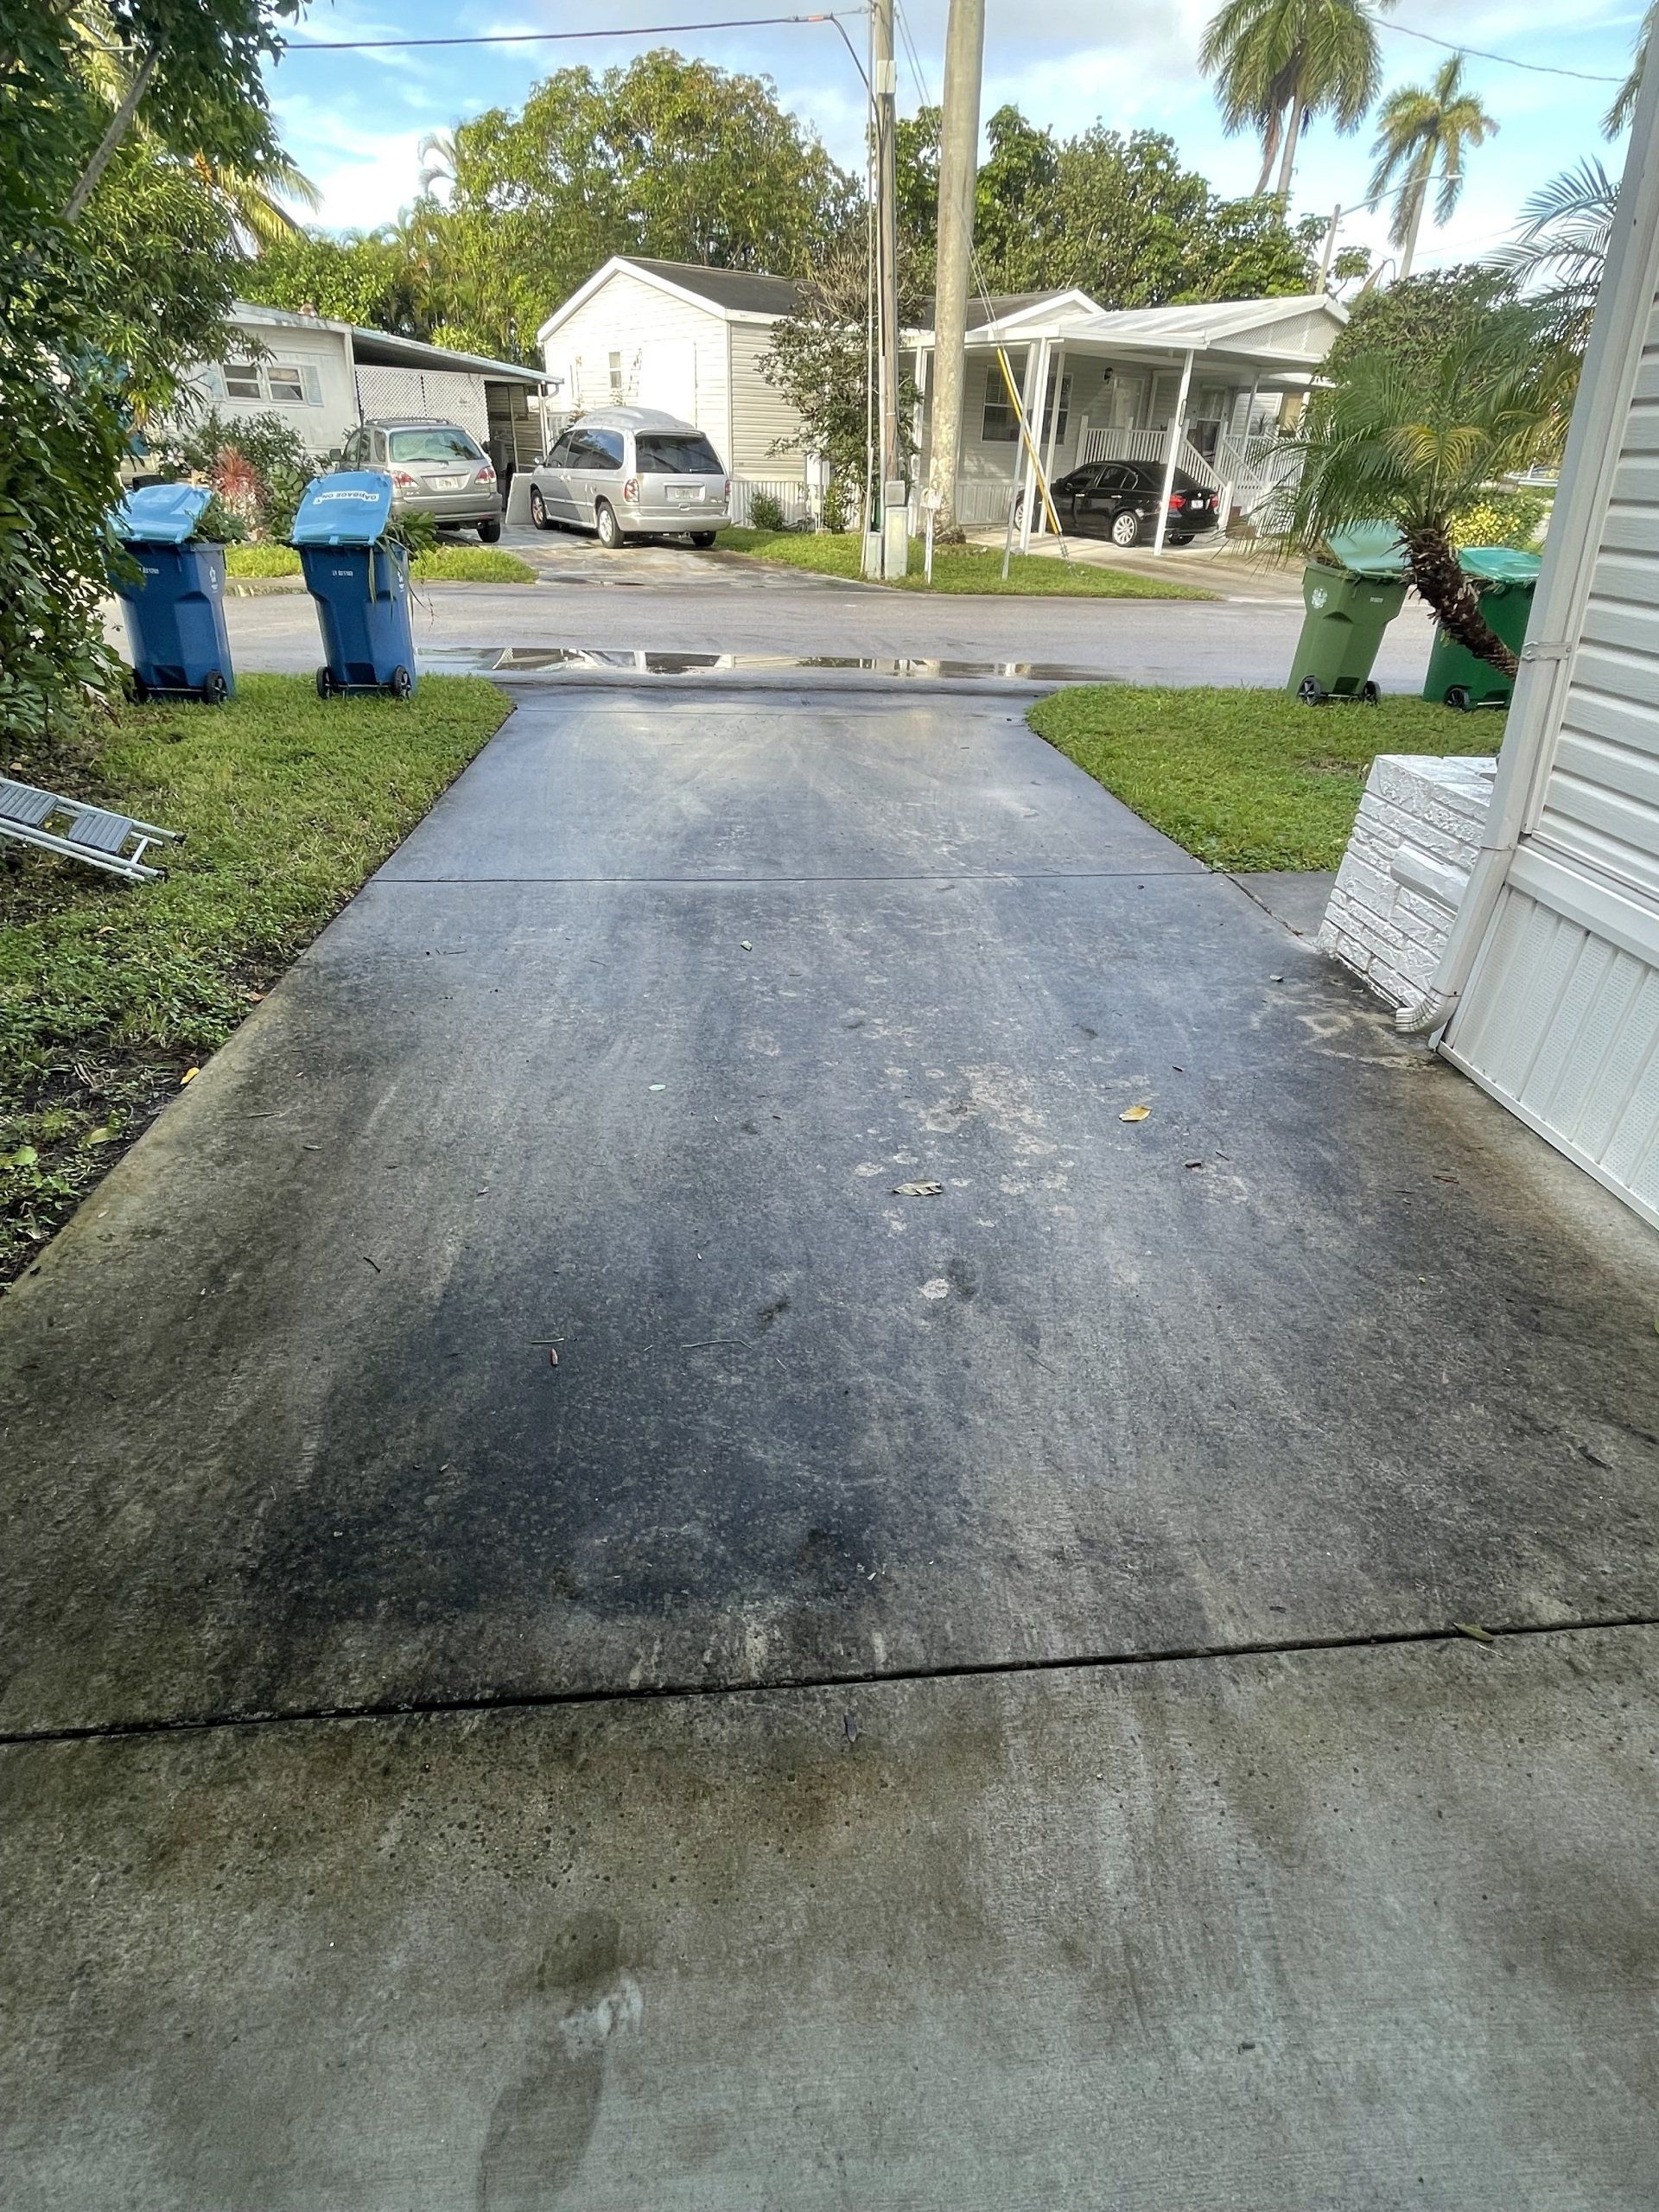 Restore the pristine look of your driveway and sidewalks